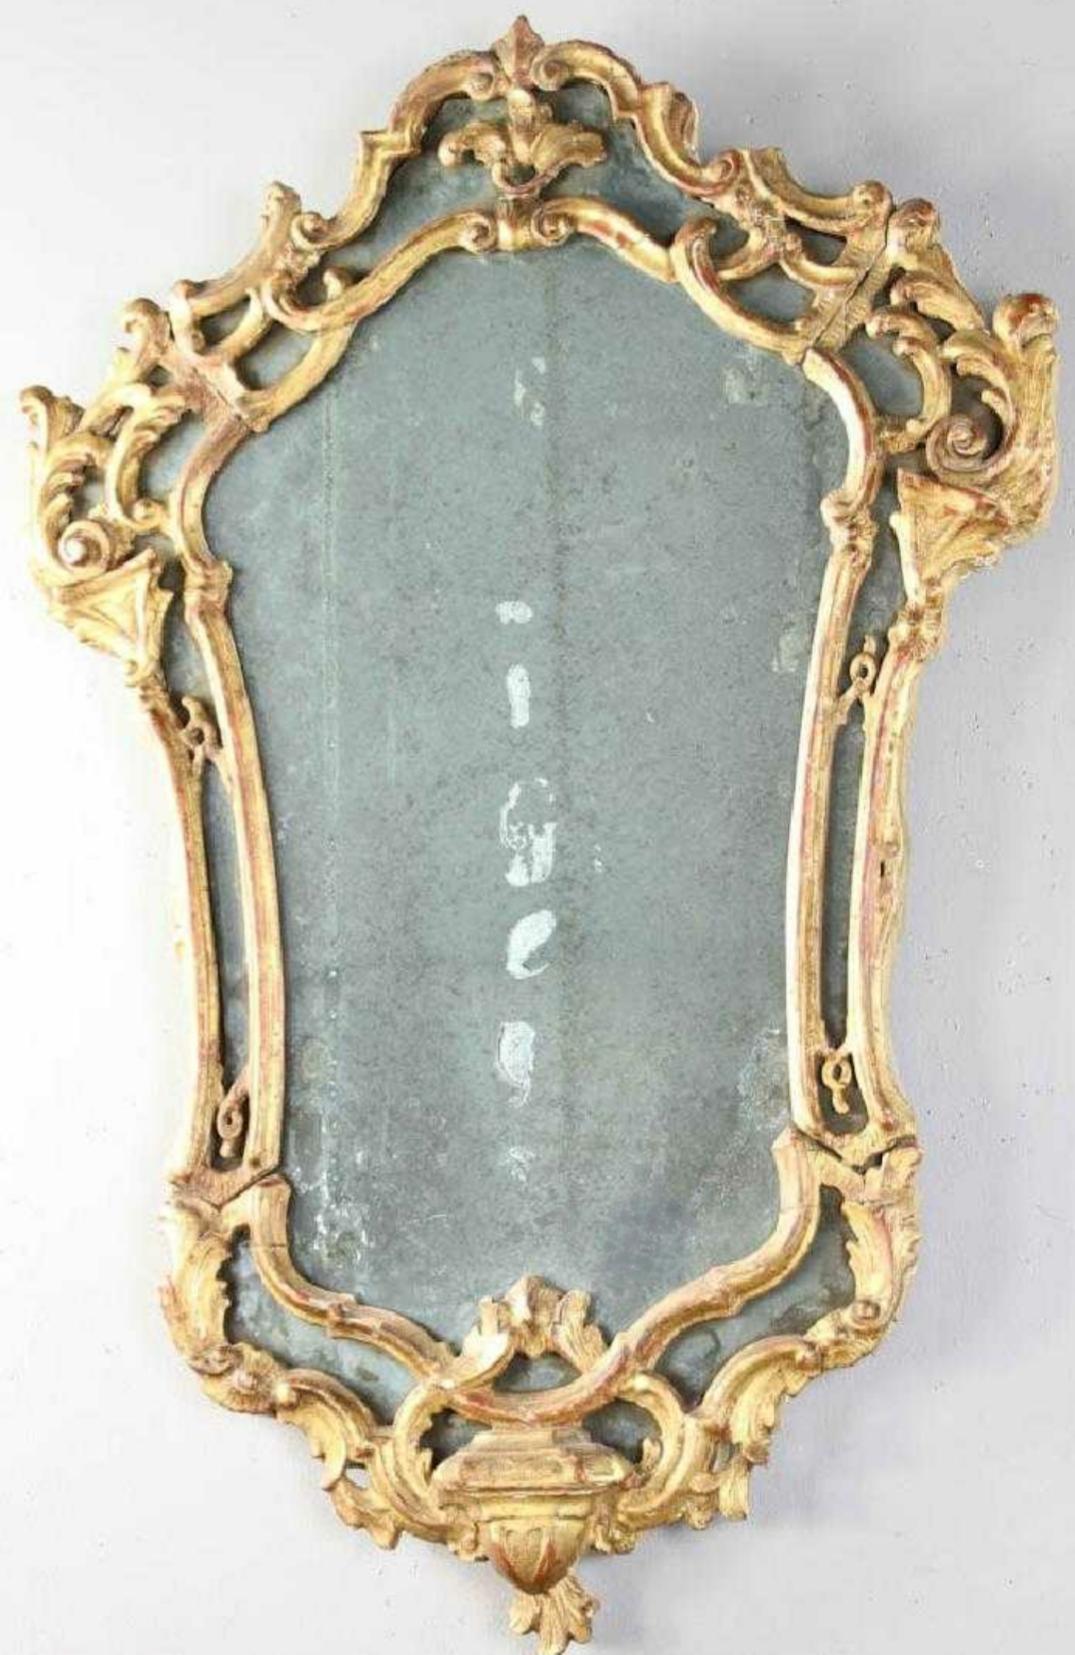 This is a lovely pair of Venetian mirrors and sized perfectly to fit in many applications. The gilt is in good condition and mirror is foxed beautifully with a good amount of reflection.